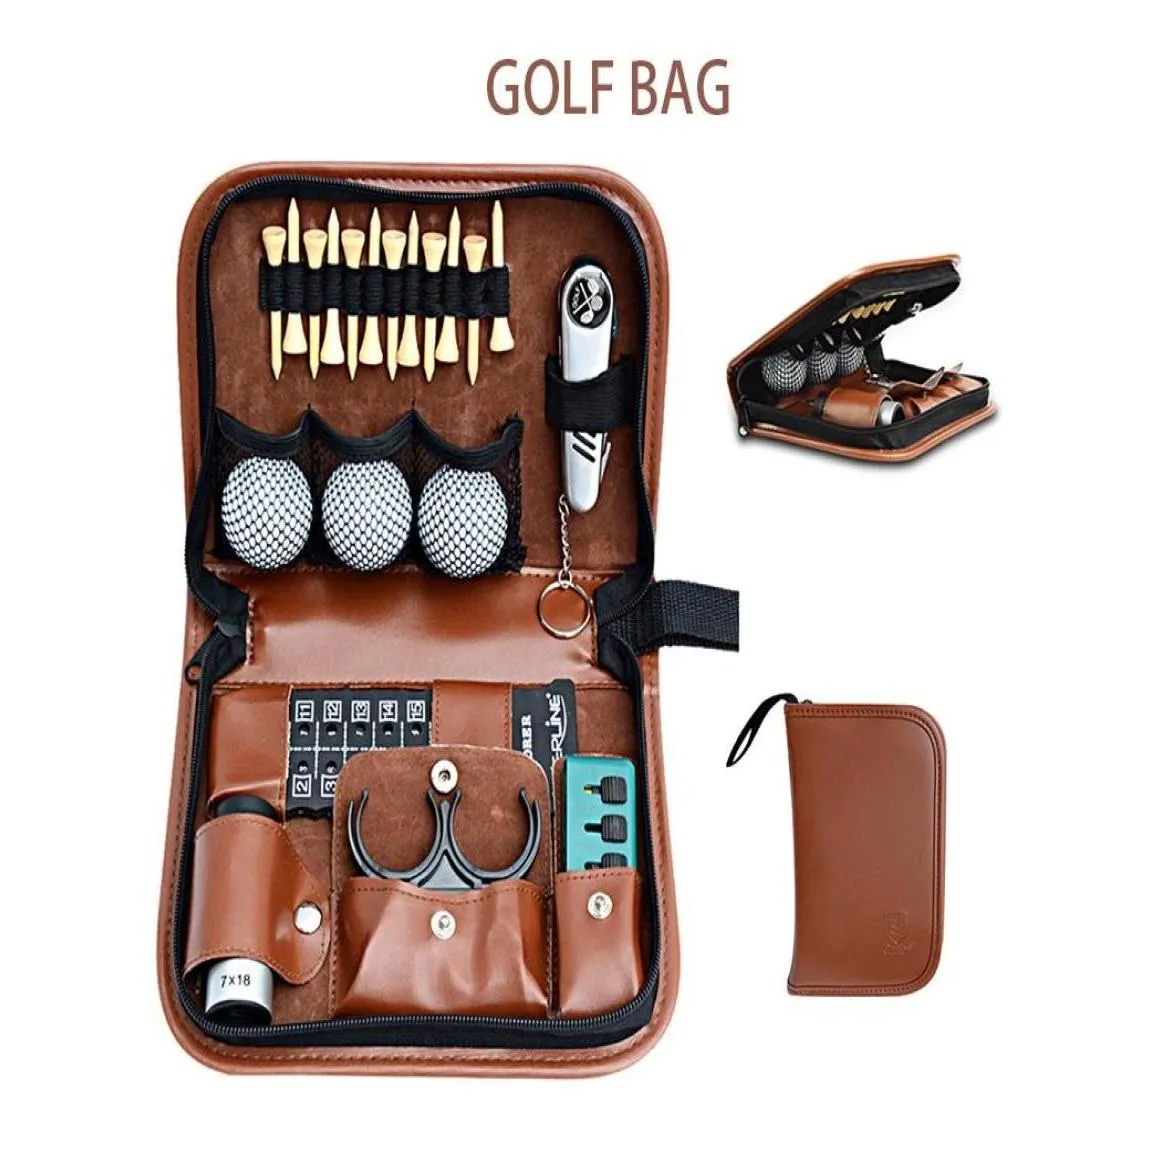 Golf Training Aids Bag Mtifunction Tool Handbag Set Kit Carrying Pack Rangefinder Knife Brush Ball Clip Teeing Area8200593 Drop Deliv Dh85W